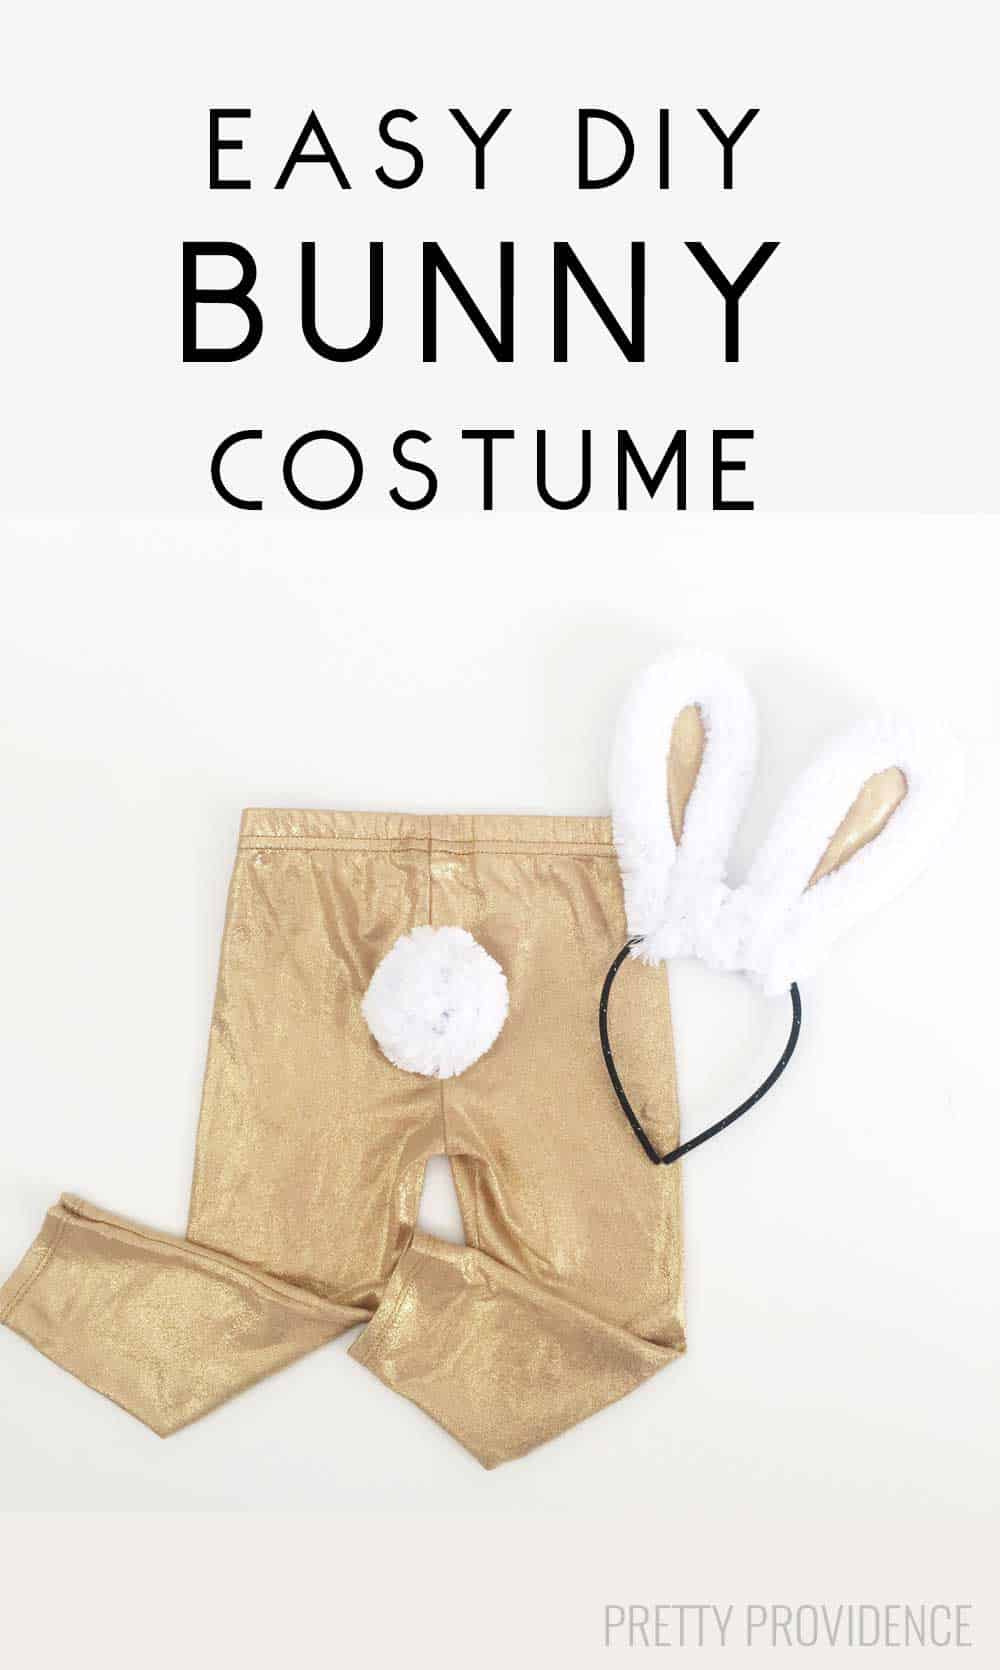 This easy DIY bunny costume is NO SEW, so cute and fast to make! Perfect for toddlers or kids.